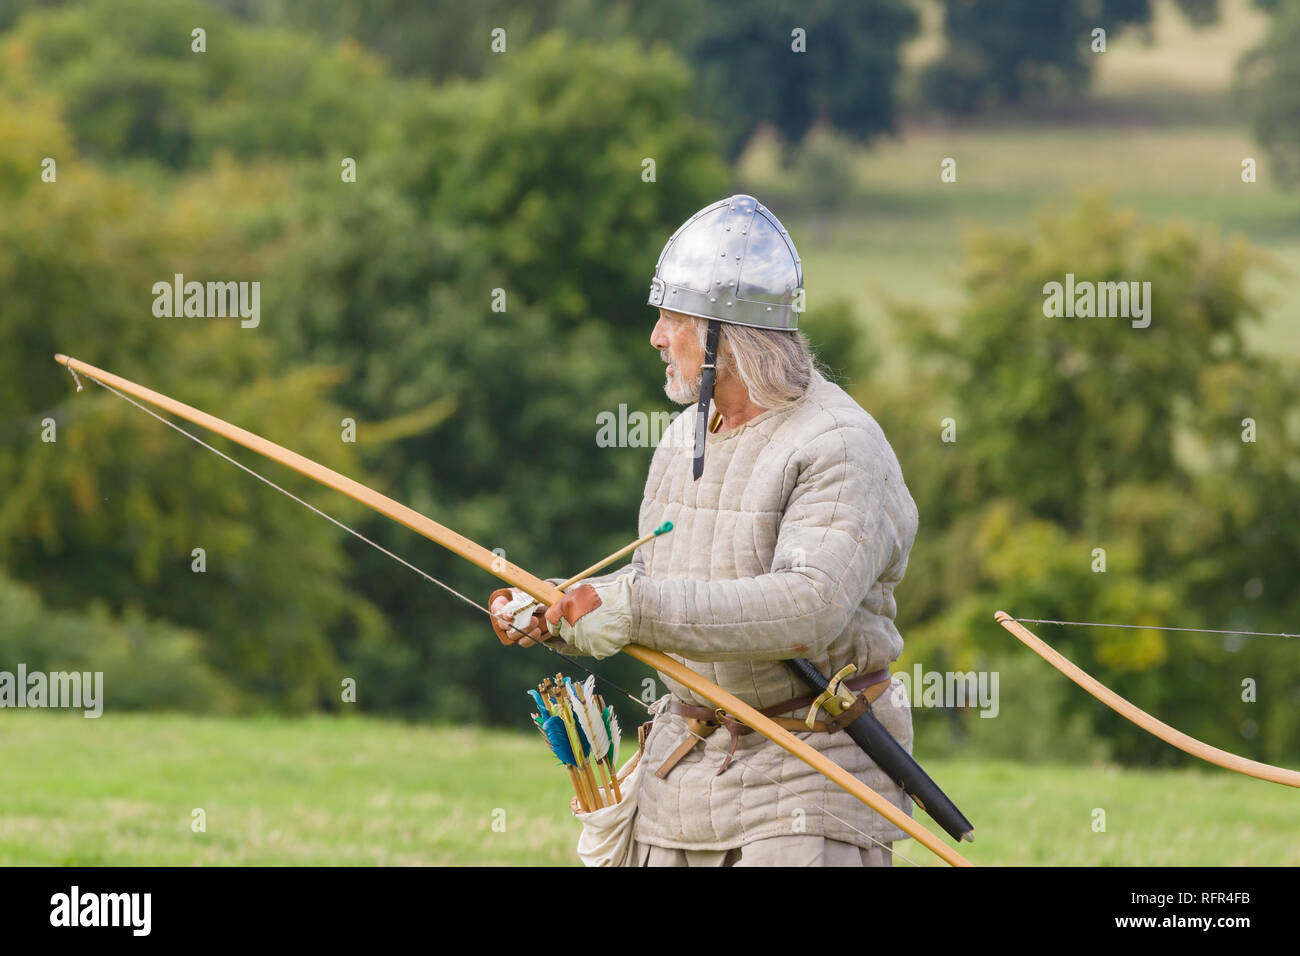 Medieval re-enactor dressed as an archer of the 12th century equiped with a long bow re-enacting combat of the period Stock Photo